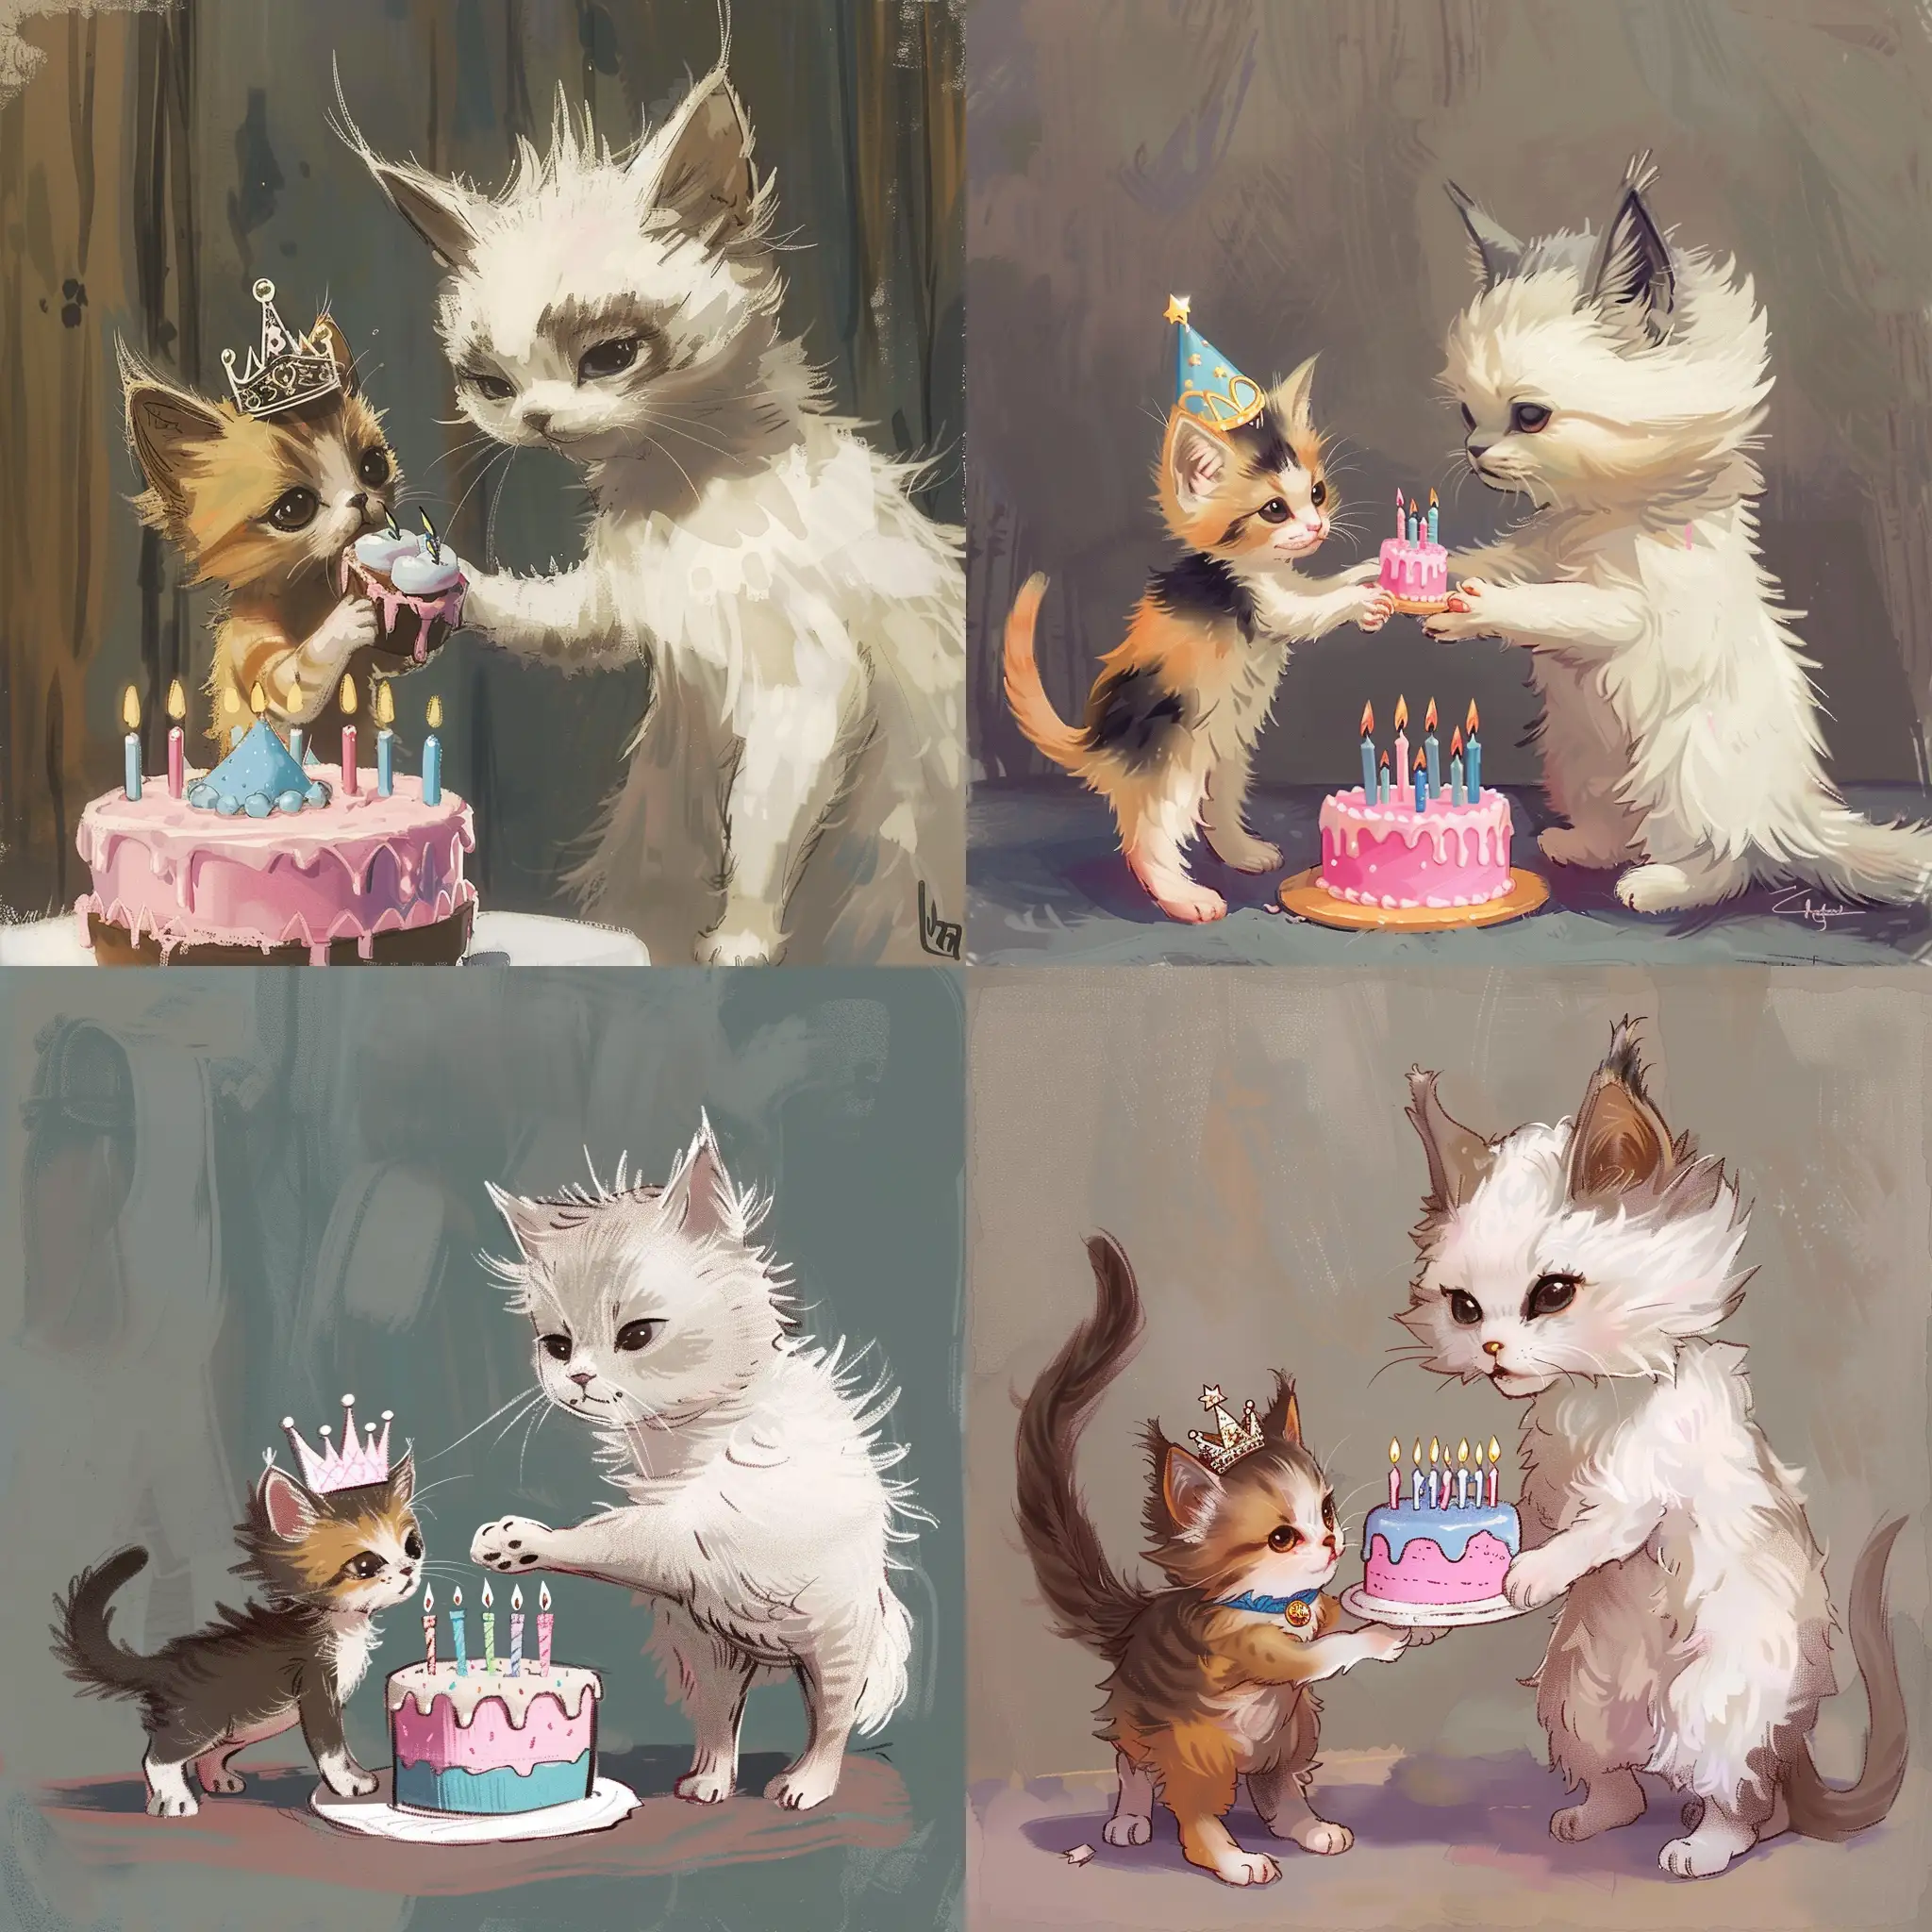 small calico kitten wearing a tiara. a 
larger Norweigan forest cat is handing her a pink and blue birthday cake with candles on it. The Norwigan forest cat is white and grey. style is anime